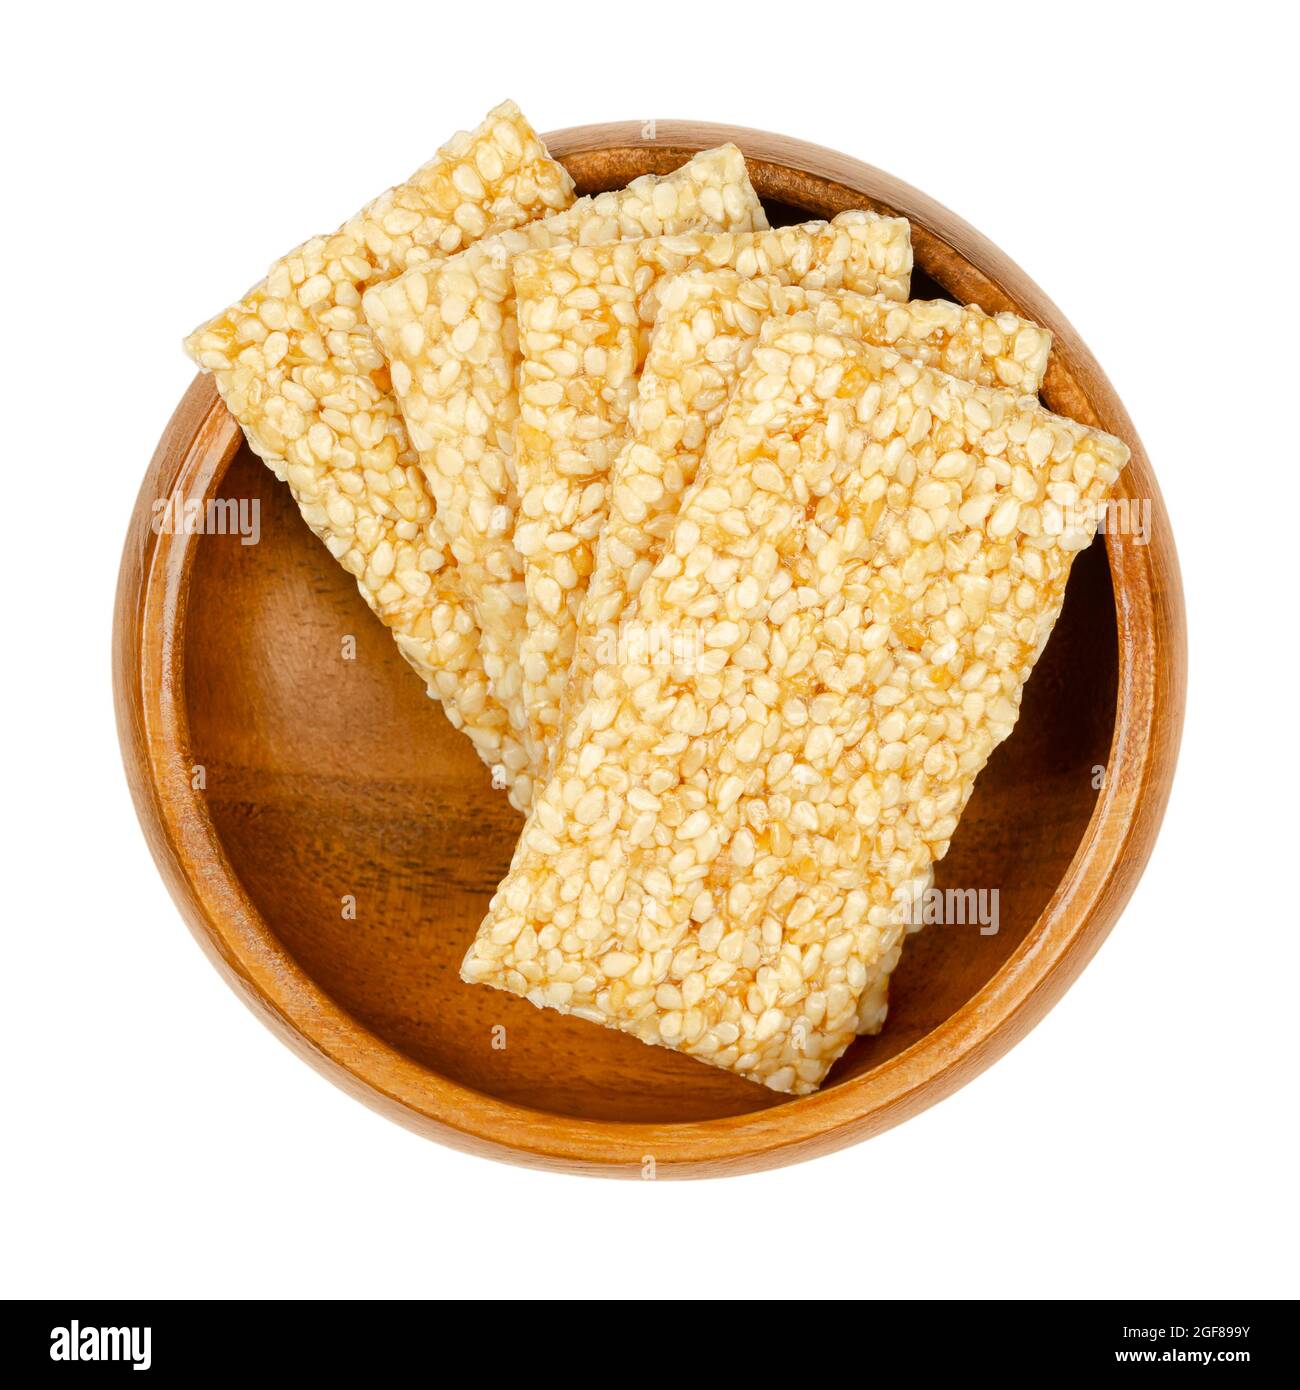 Sesame seed candy bars, in a wooden bowl. Sesame brittle or crunch, a confection of sesame seeds and honey pressed into flat bars, a popular snack. Stock Photo